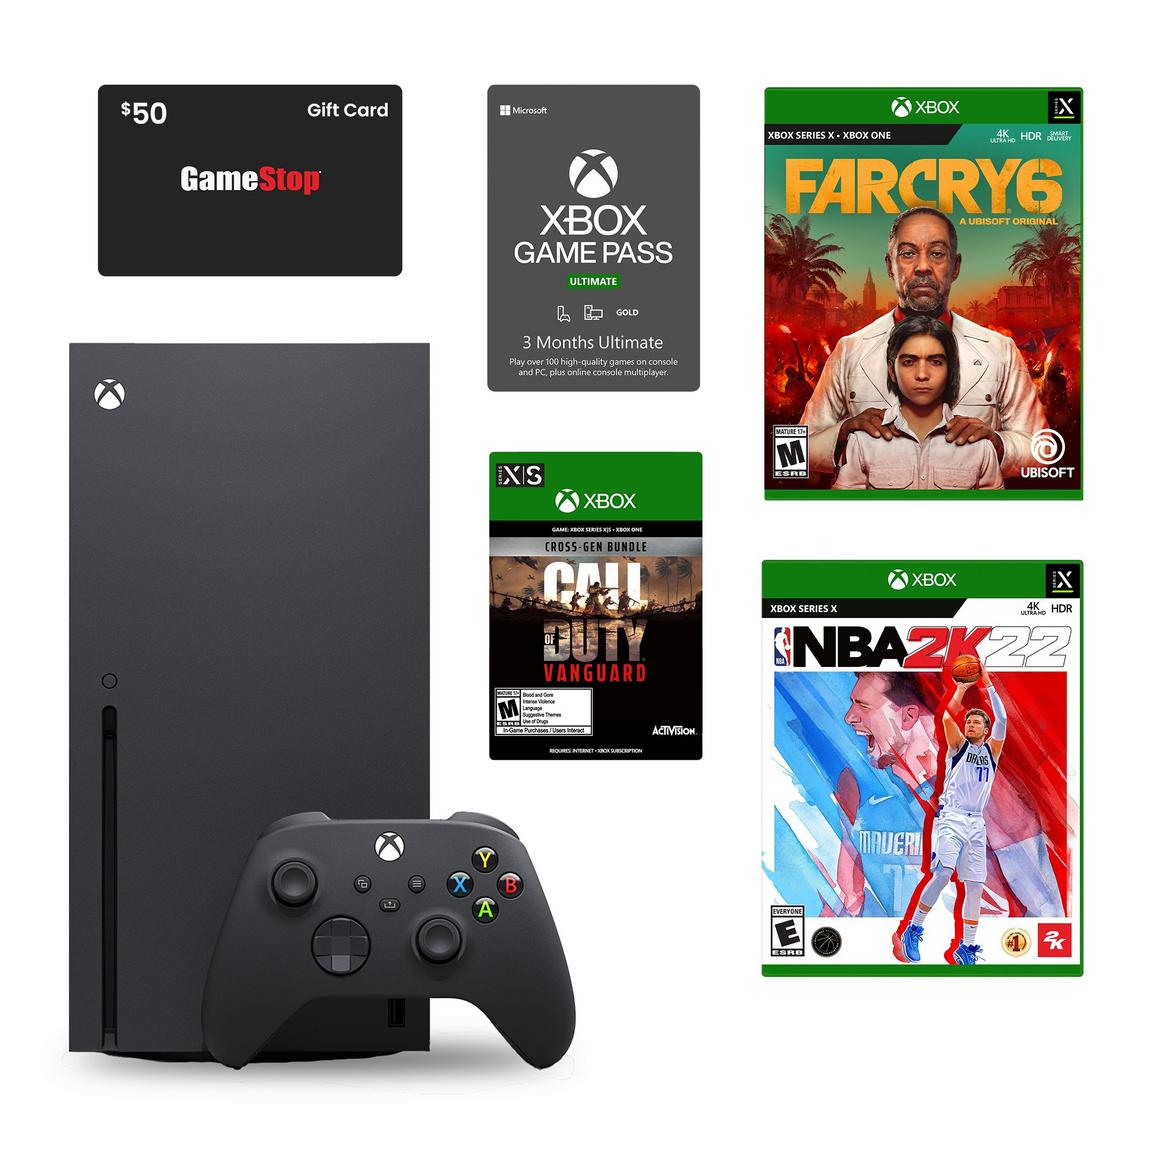 Xbox-Series-X-Ultimate-Digital-Games-and-System-Bundle-with-$50-GameStop-Gift-Card